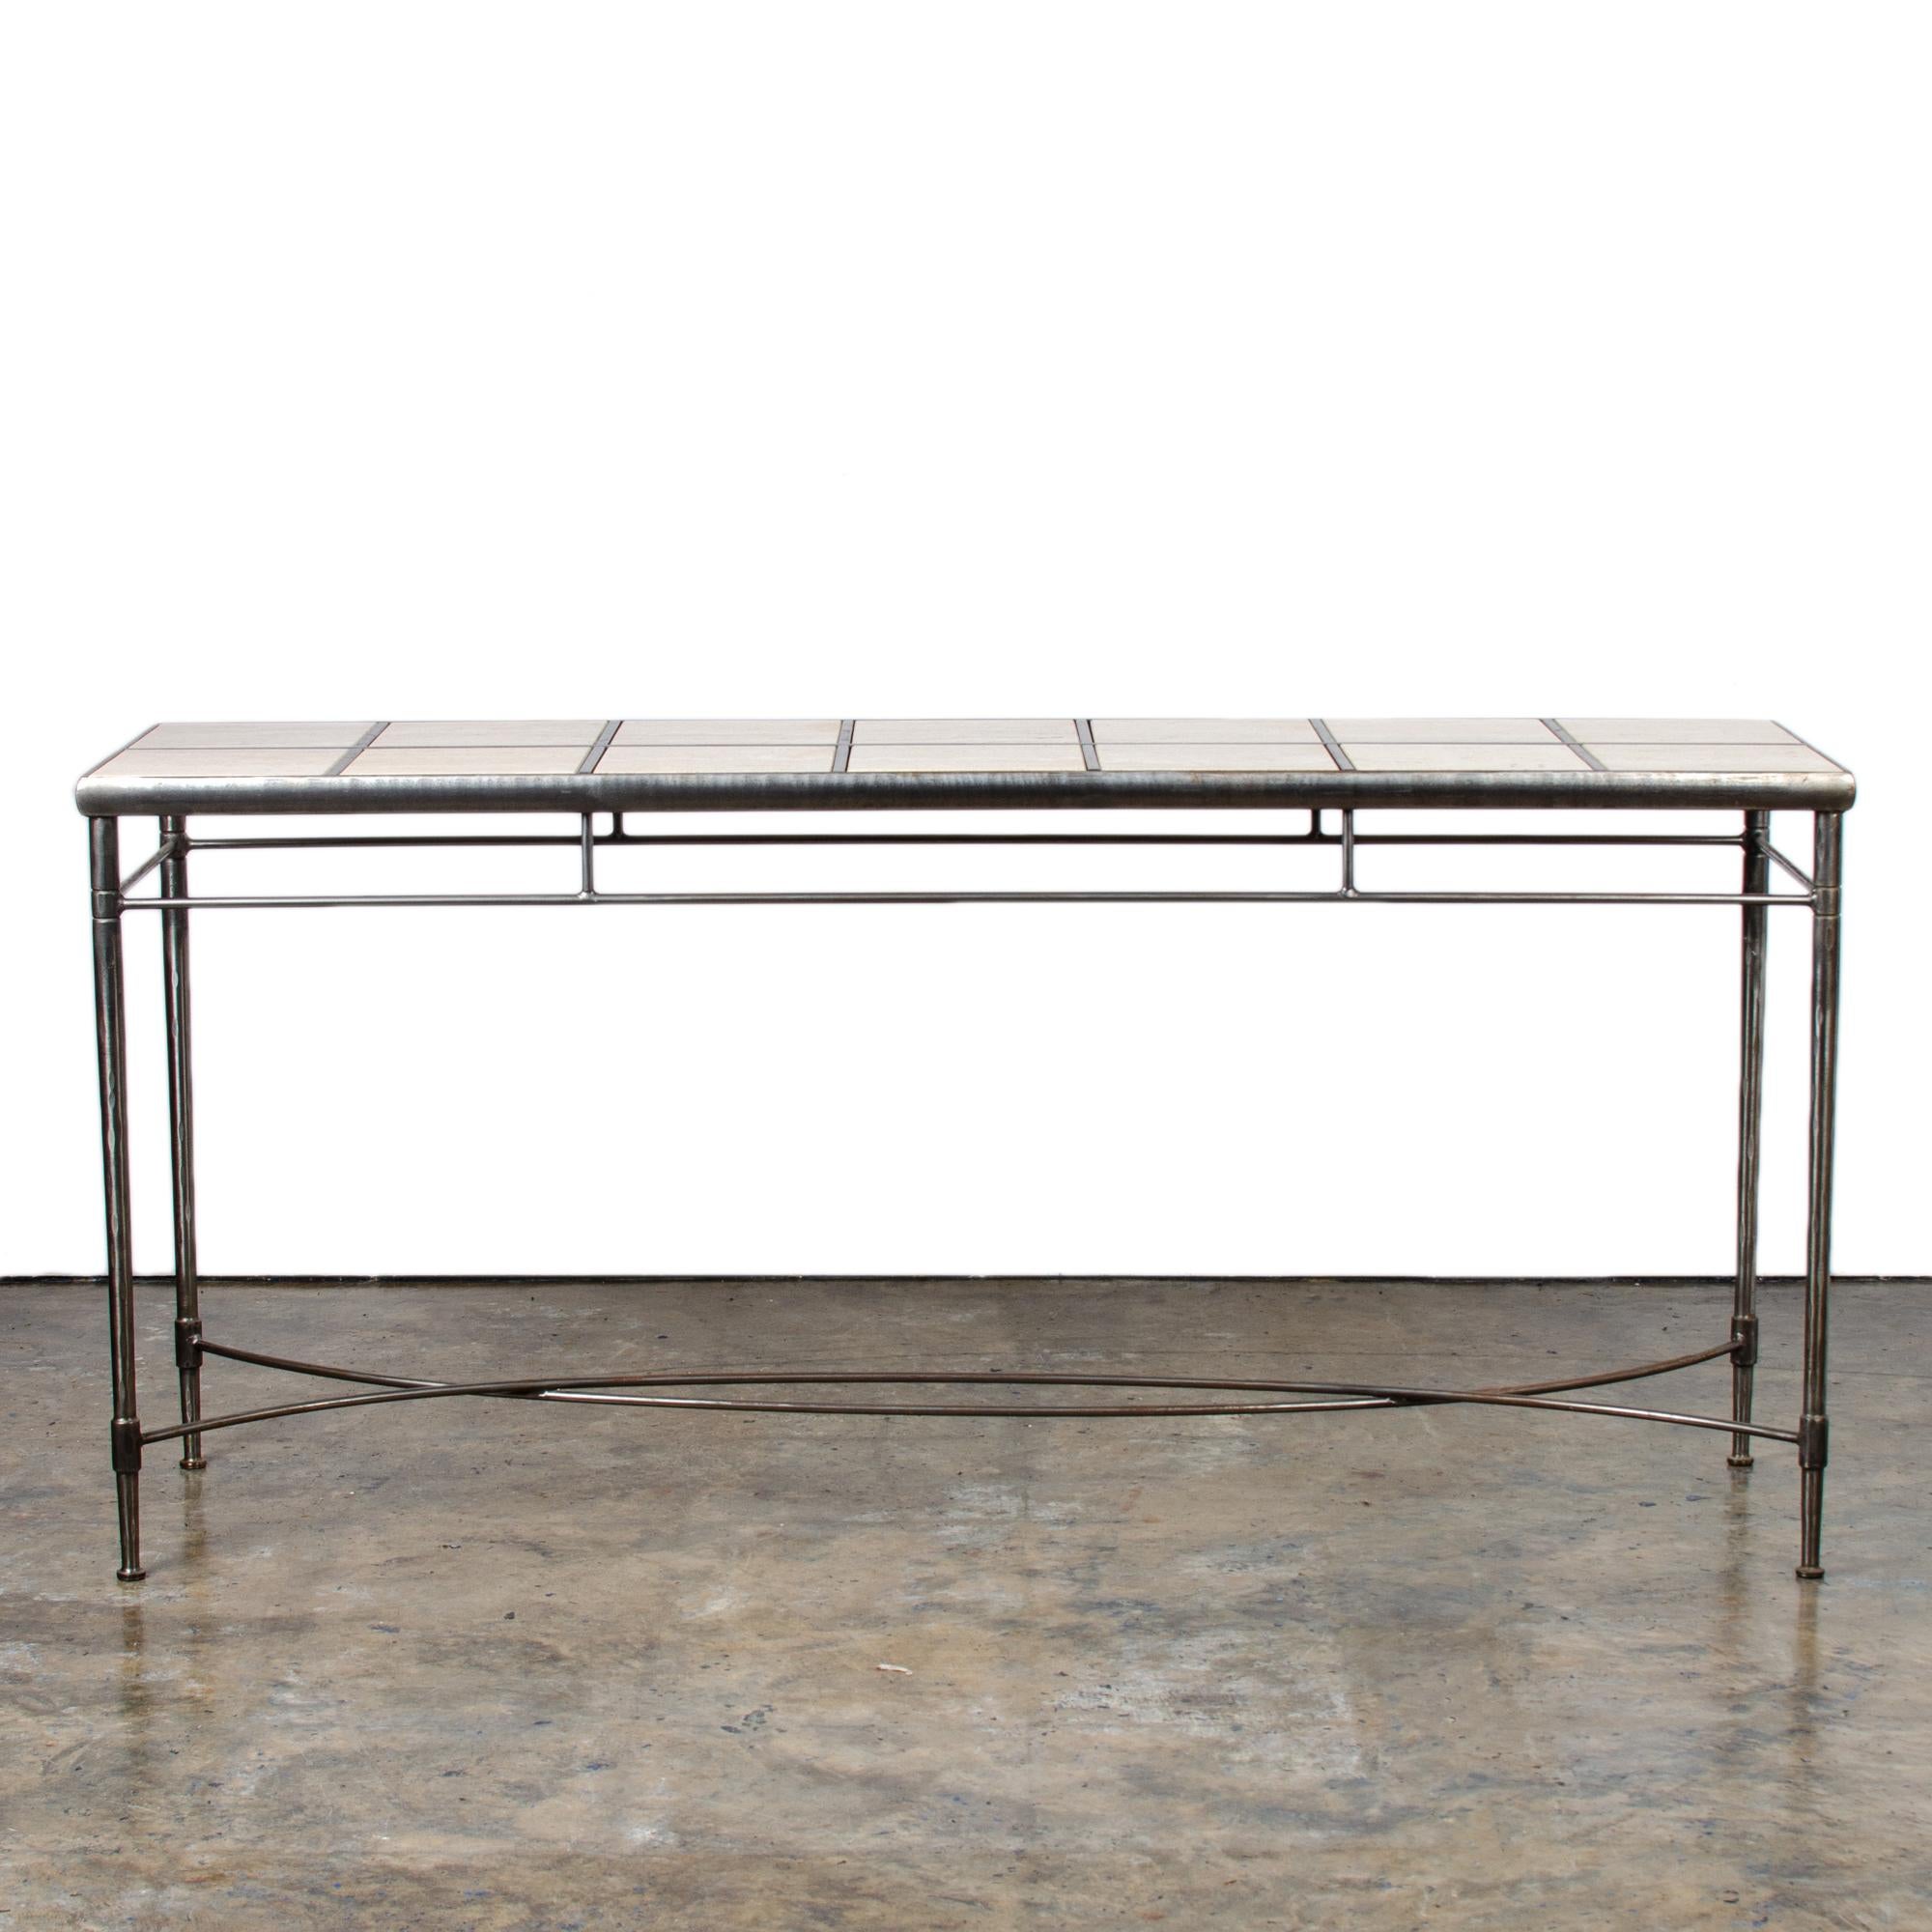 Modern Italian Iron and Travertine Tile Console Table Regular price For Sale